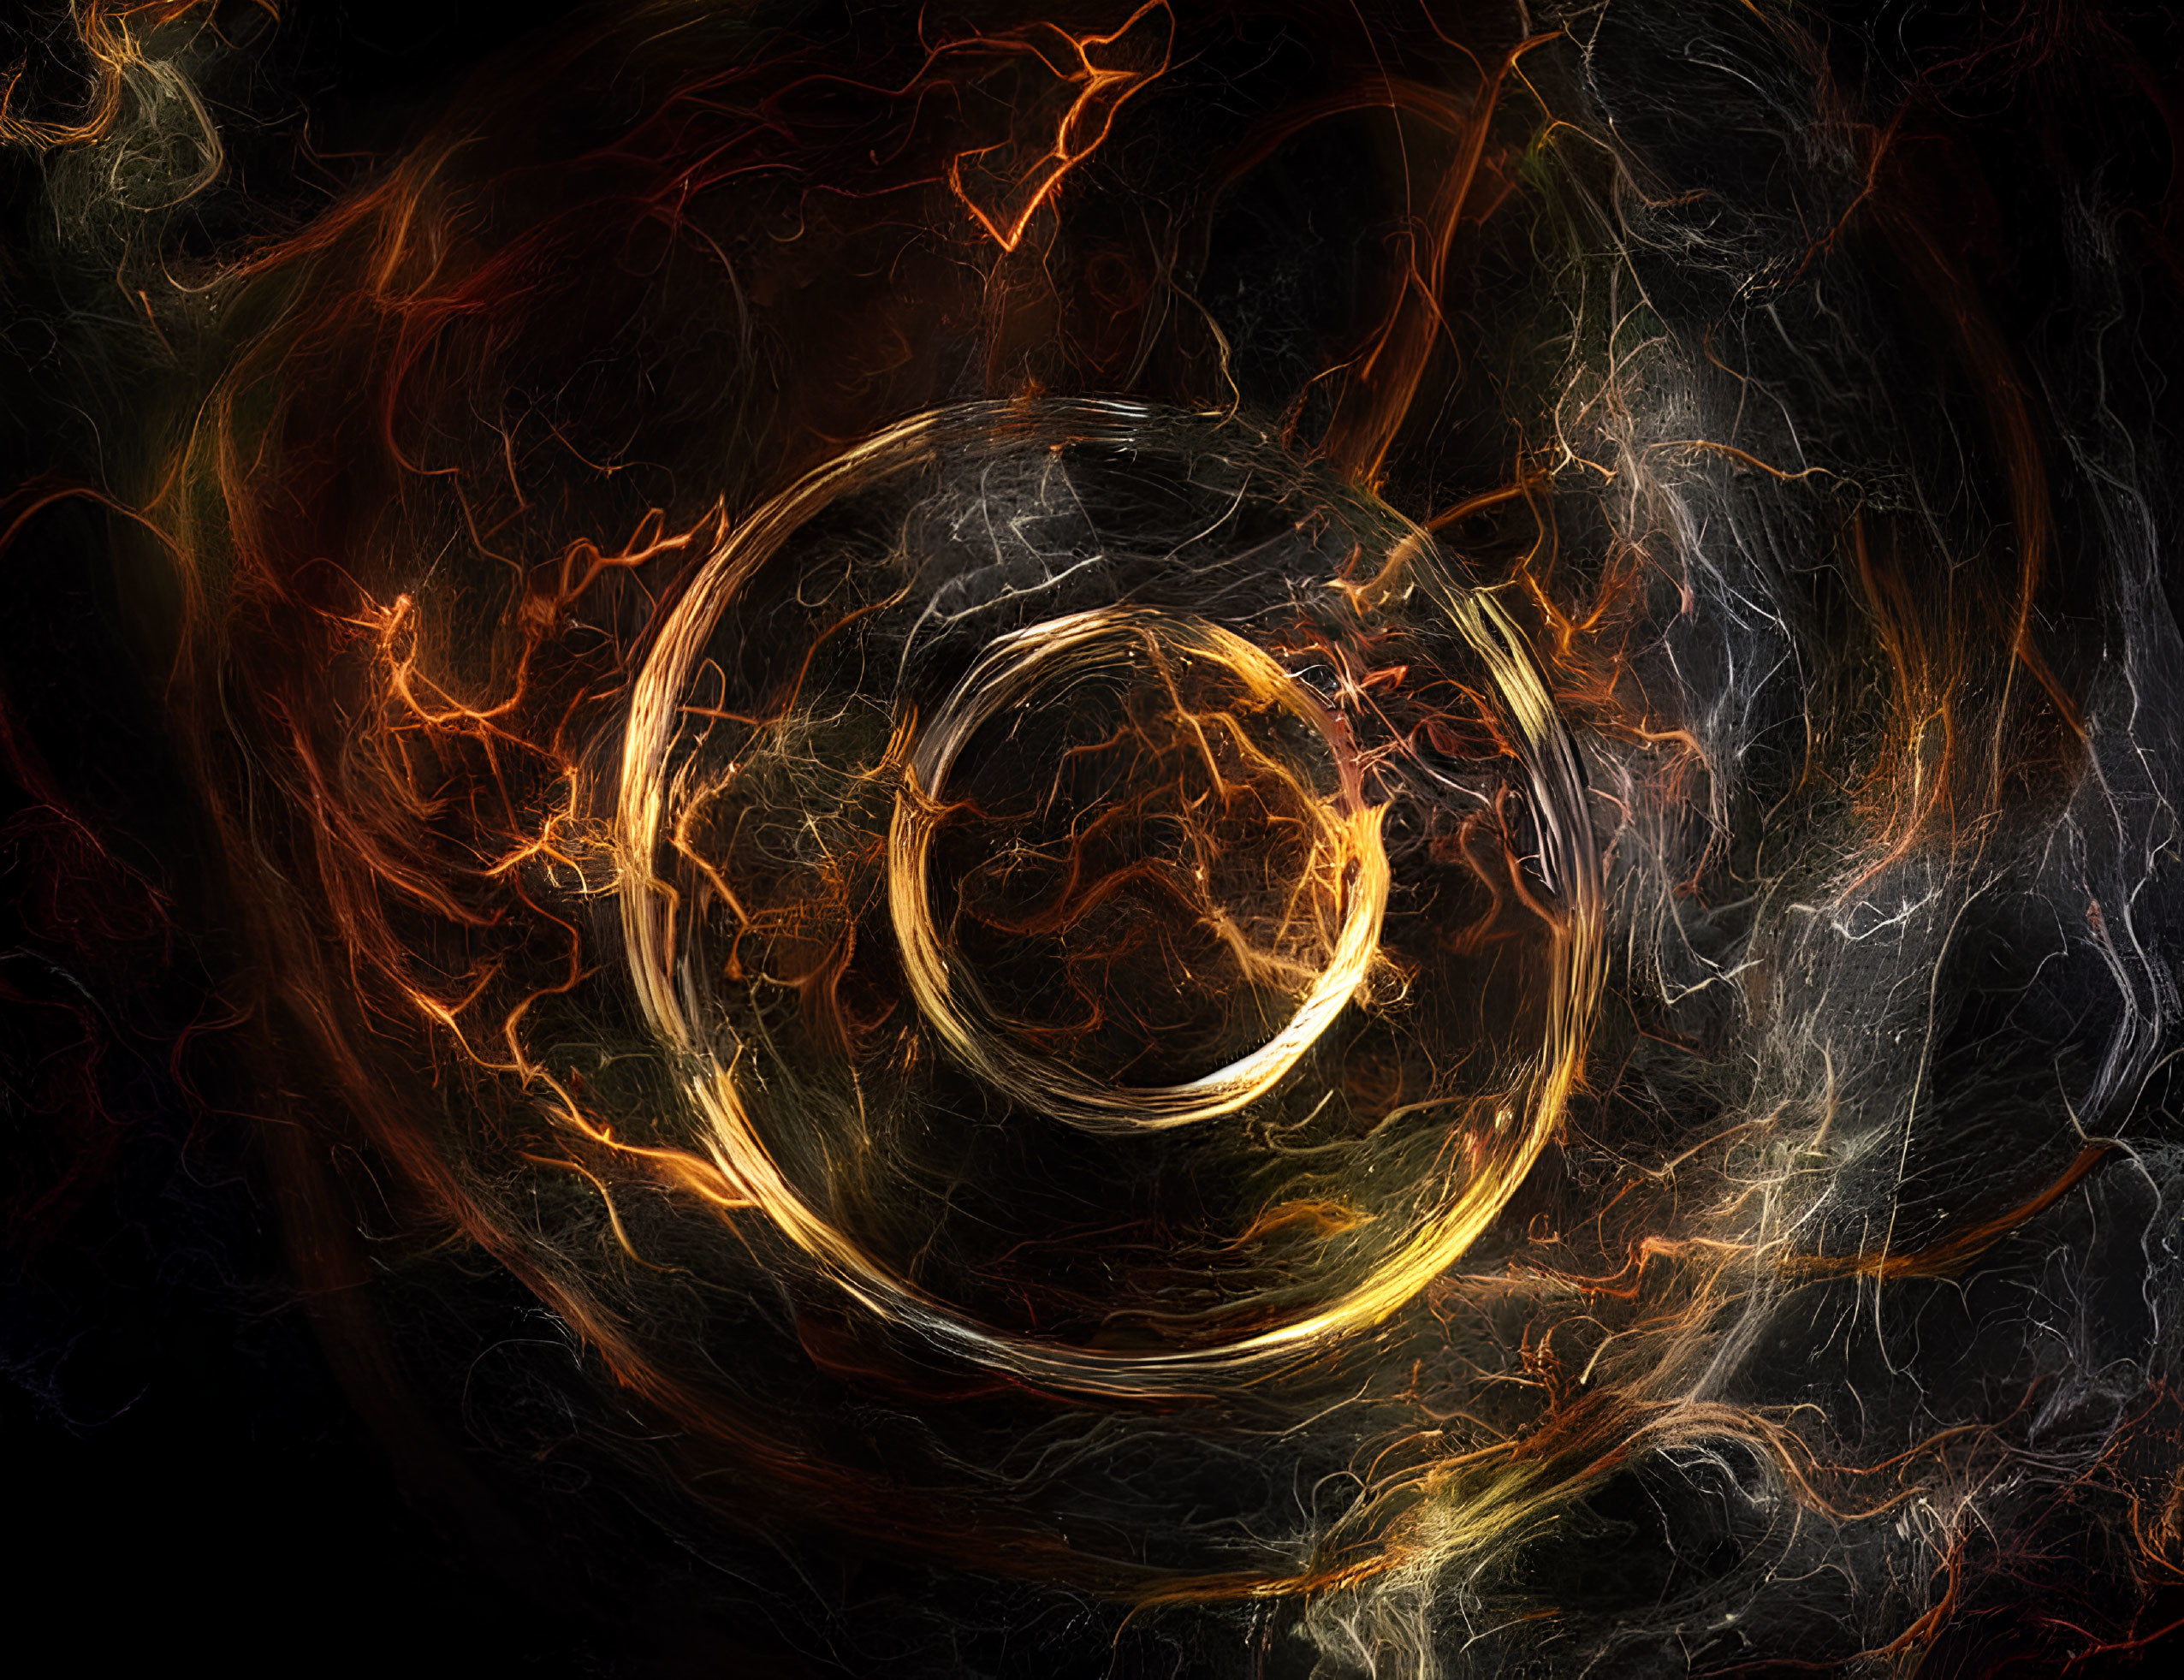 Abstract Golden Light Whirl with Orange and White Chaos on Black Background